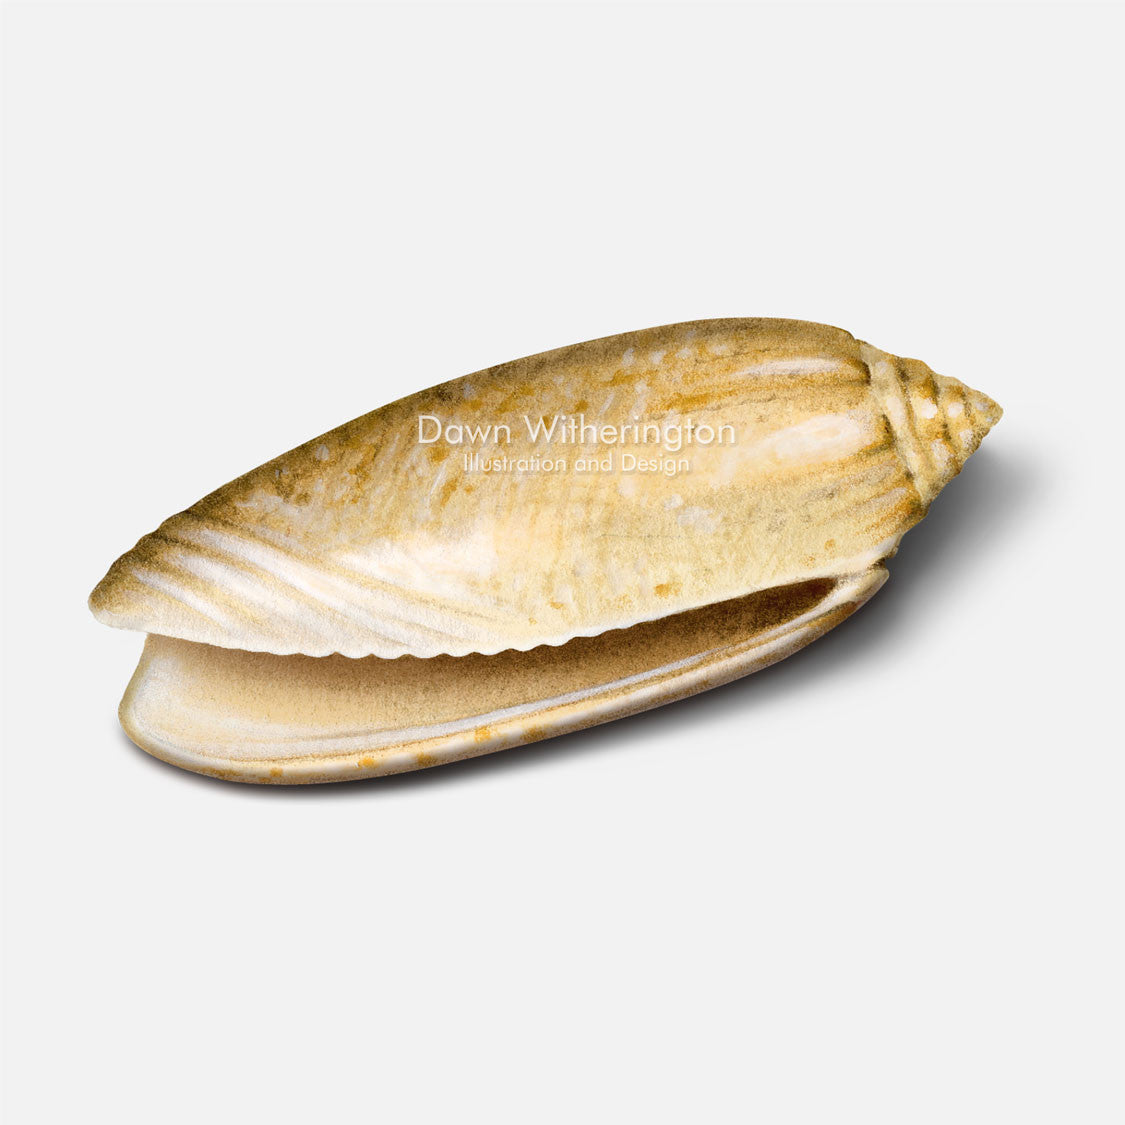 This beautiful illustration of a lettered olive shell, Oliva sayana, is accurate in detail.